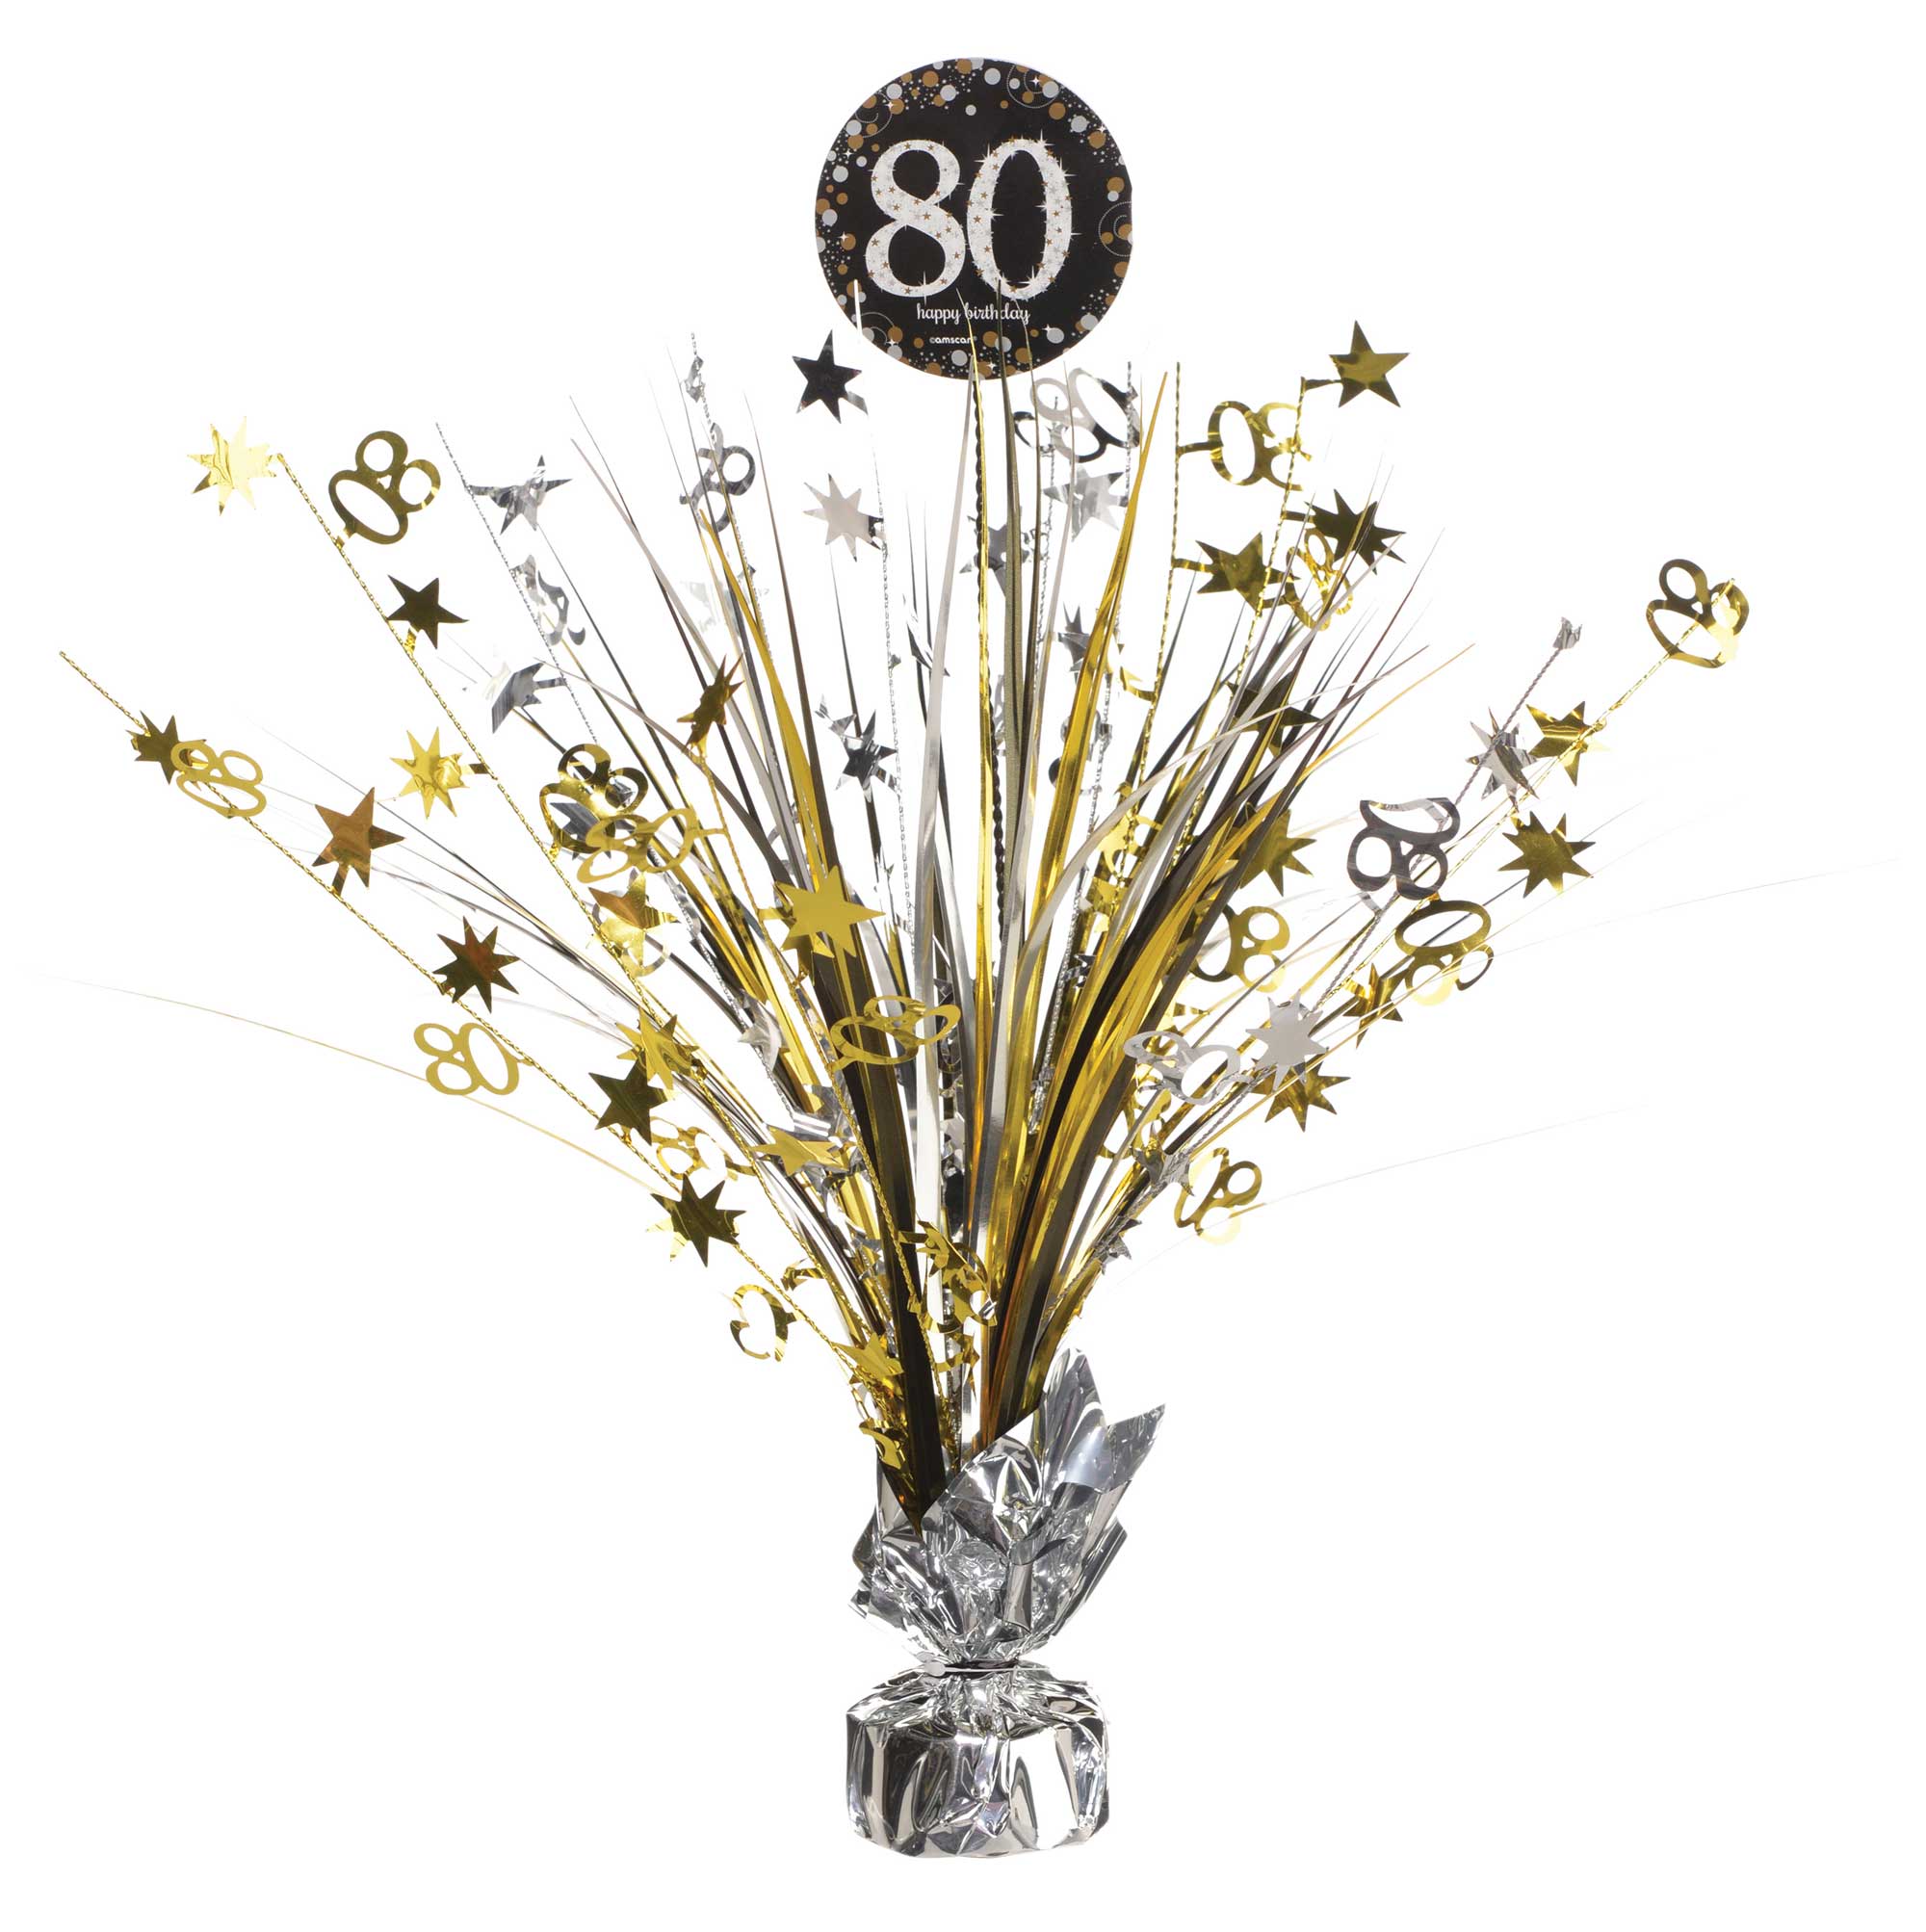 Mark 80 incredible years with our exquisite party decor! Elevate the Birthday Celebration with sophisticated touches like shimmering gold accents, elegant table centerpieces, and 80th birthday banners featuring cherished memories.